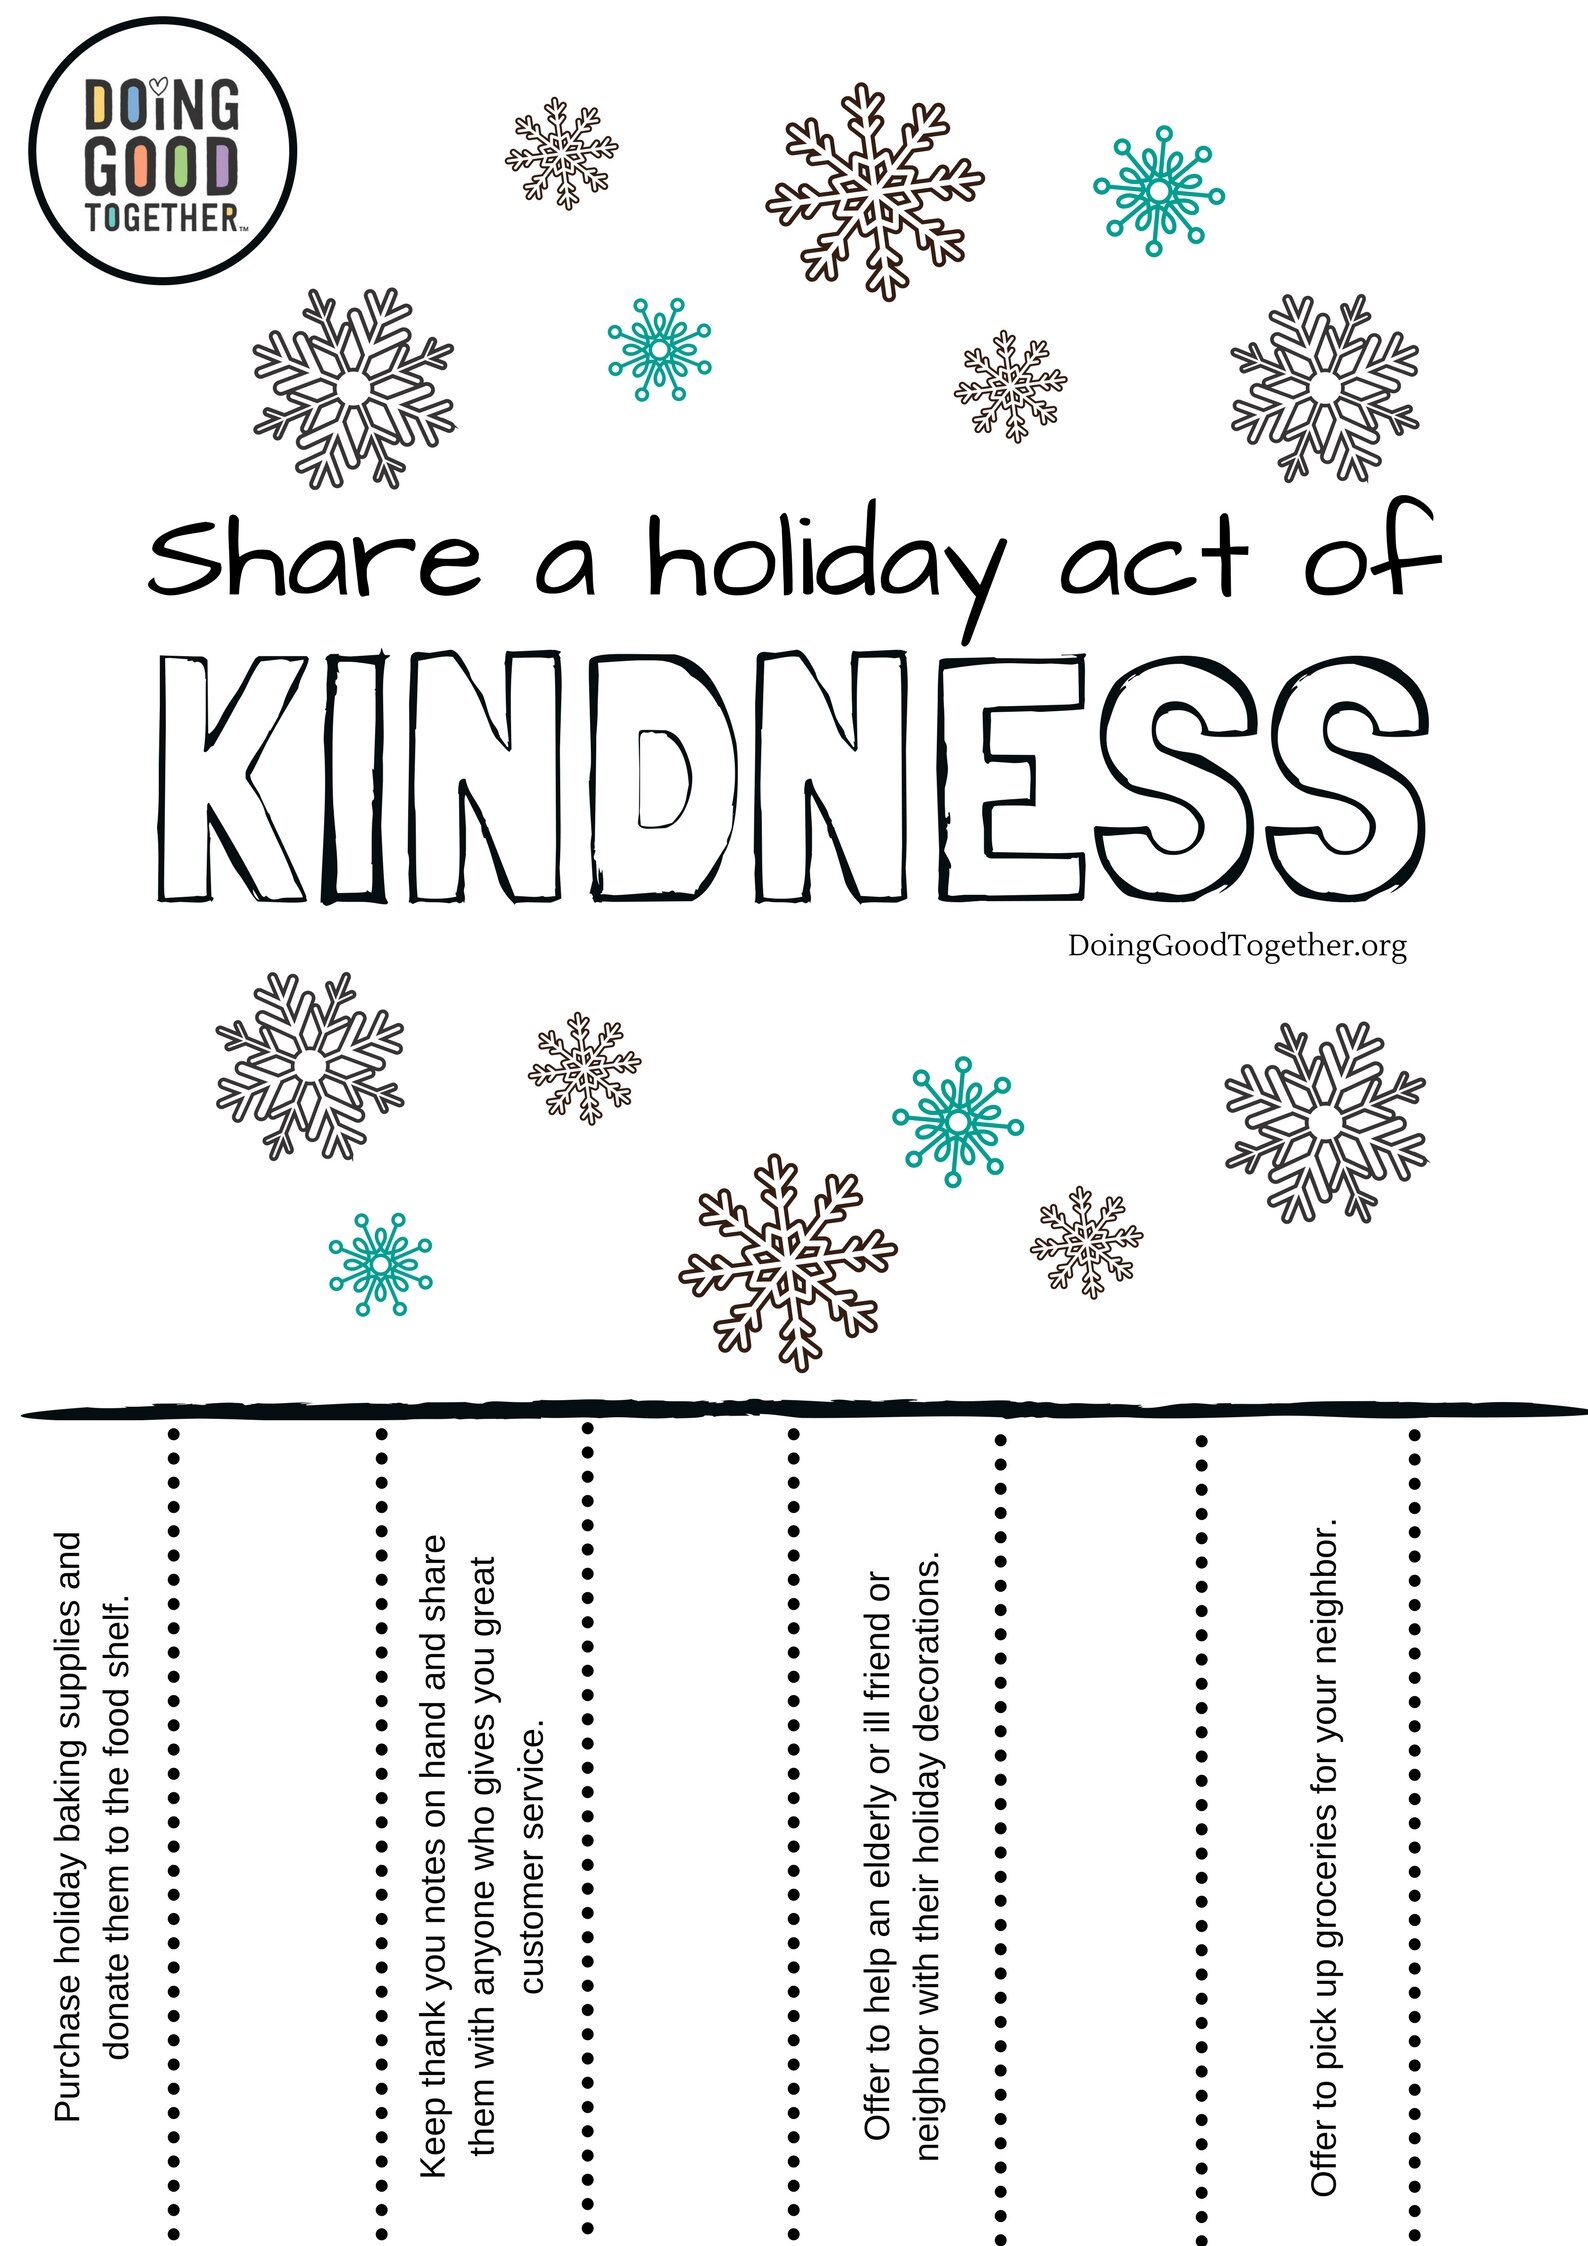 holiday act of kindness image.jpg